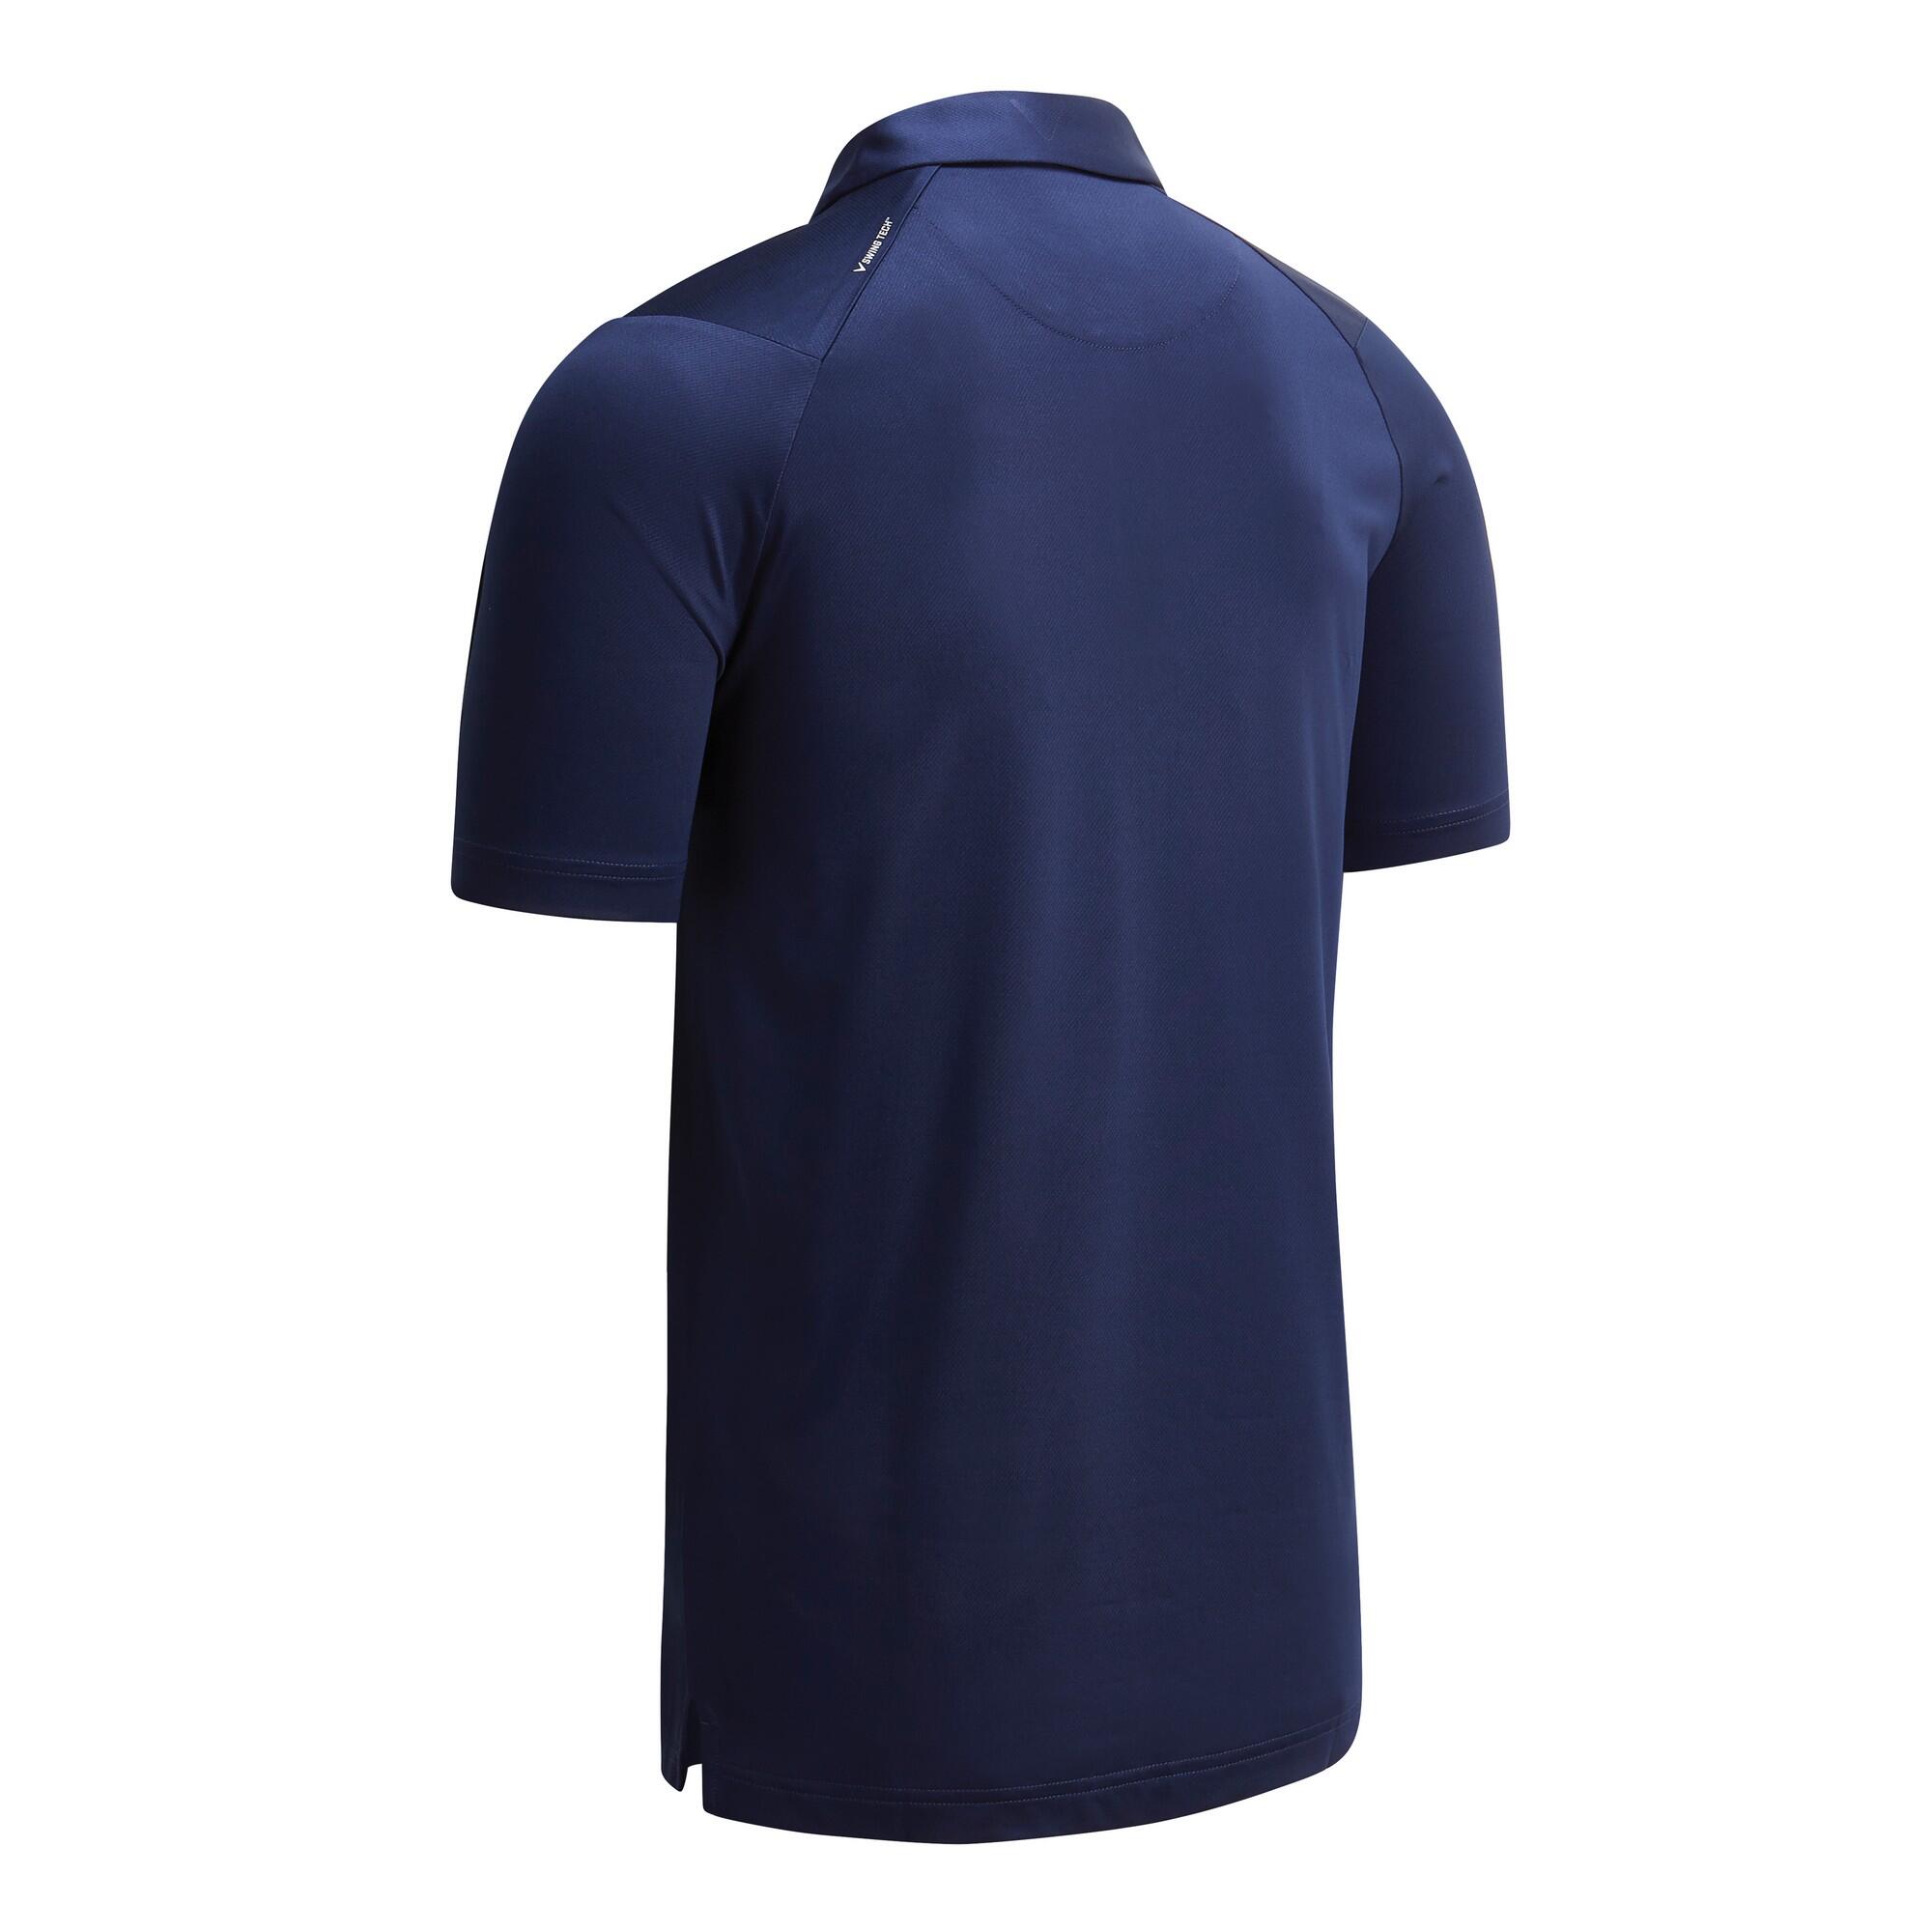 Mens Swing Tech Solid Colour Polo Shirt (Peacoat Navy) 2/3